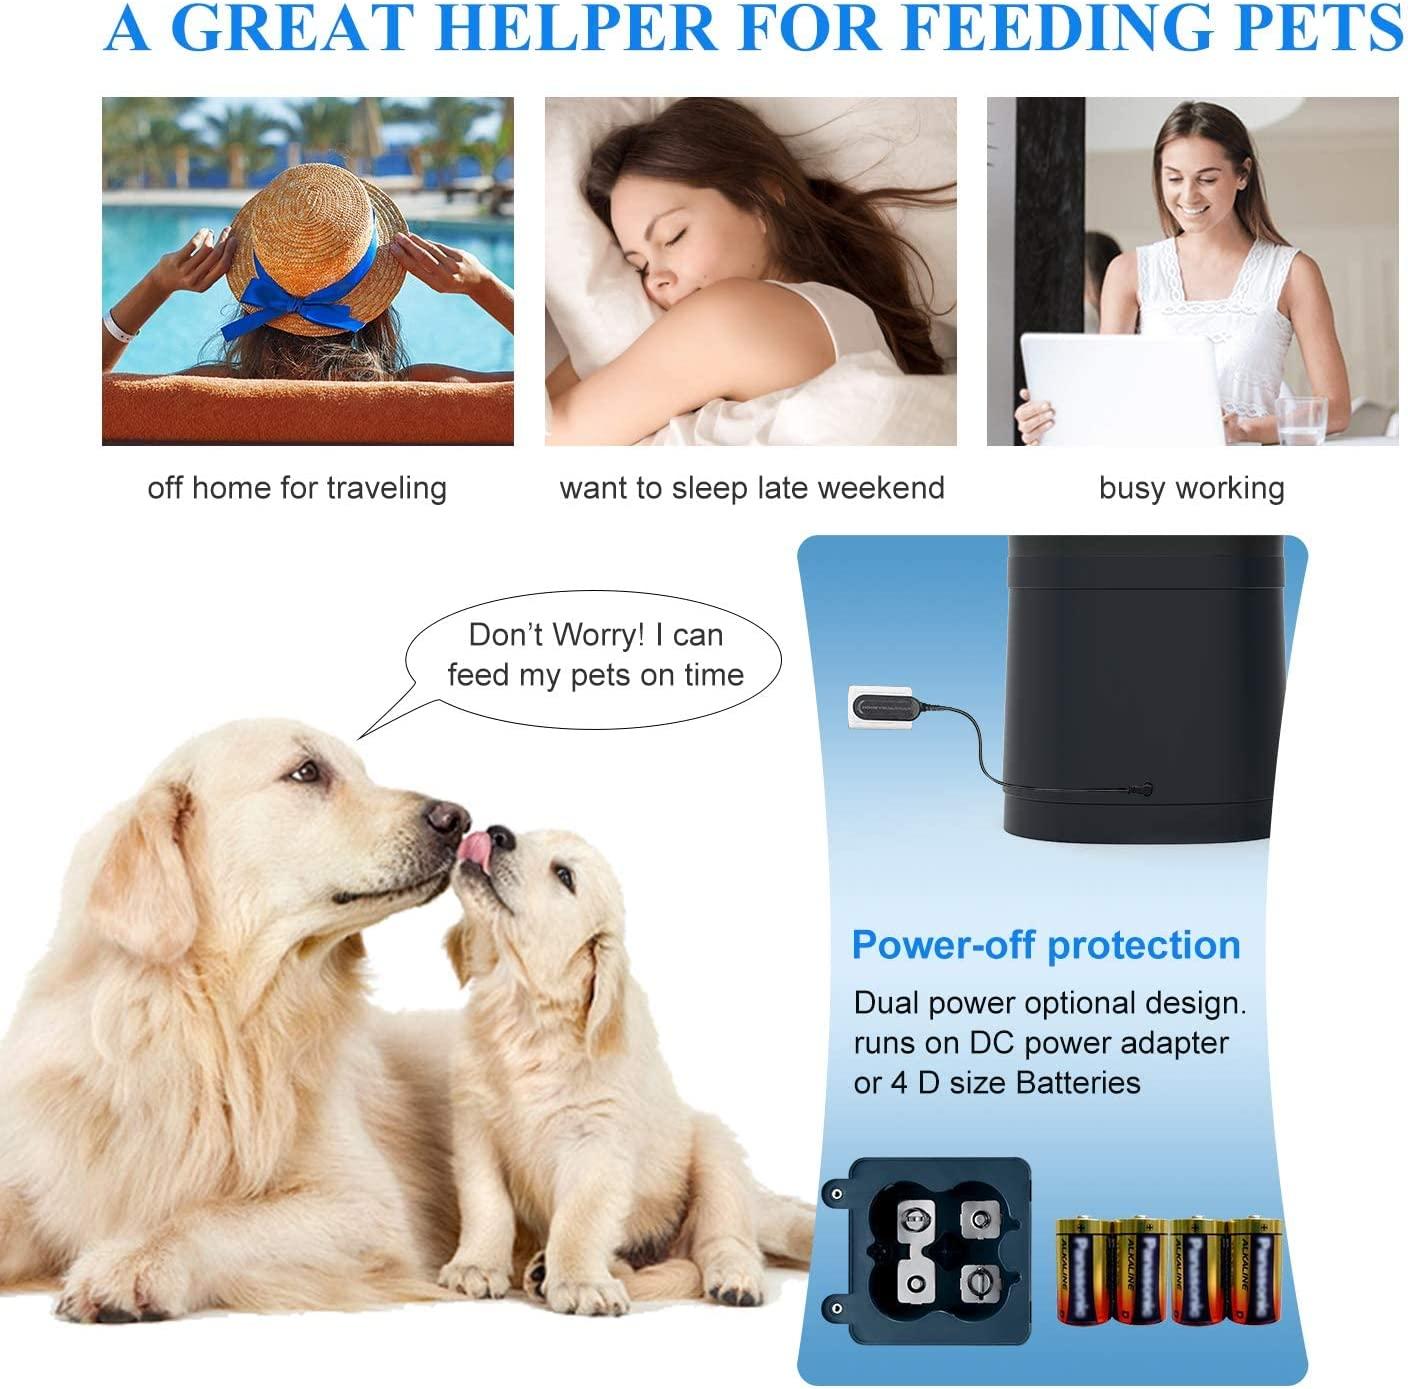 Automatic Cat Feeder for 2 Cats, HoneyGuaridan 6.5L/4.5L Pet Feeder for  Cat&Dogs Dry Food Dispenser with Desiccant Bag, Stainless Steel Bowl 6  Meals 6.5L Blue